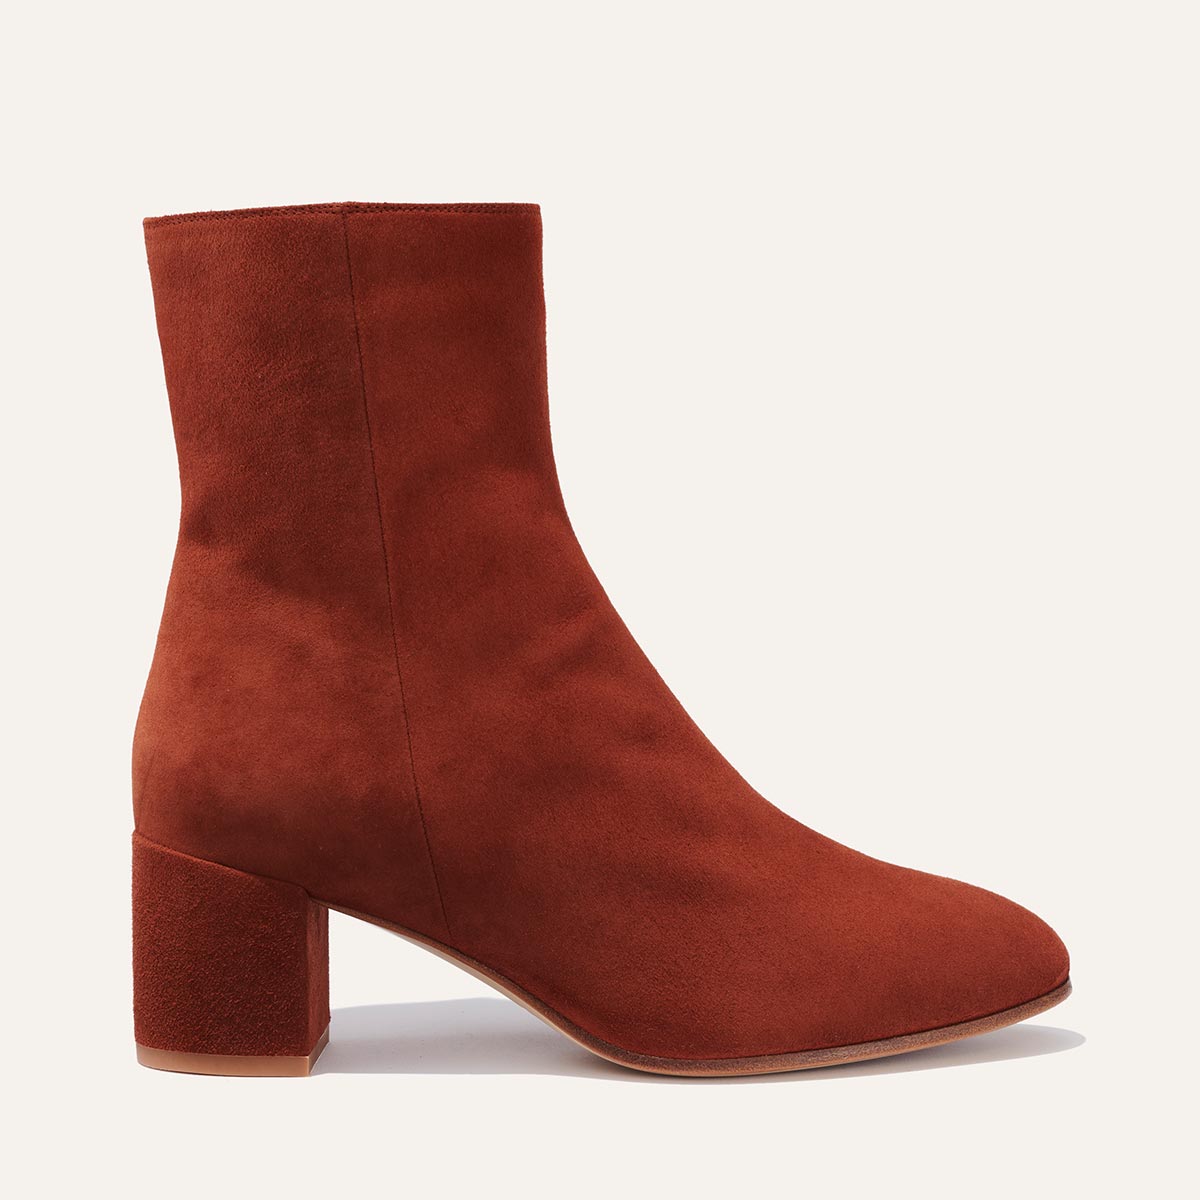 Margaux's classic ankle Boot in brandy suede with a comfortable block heel